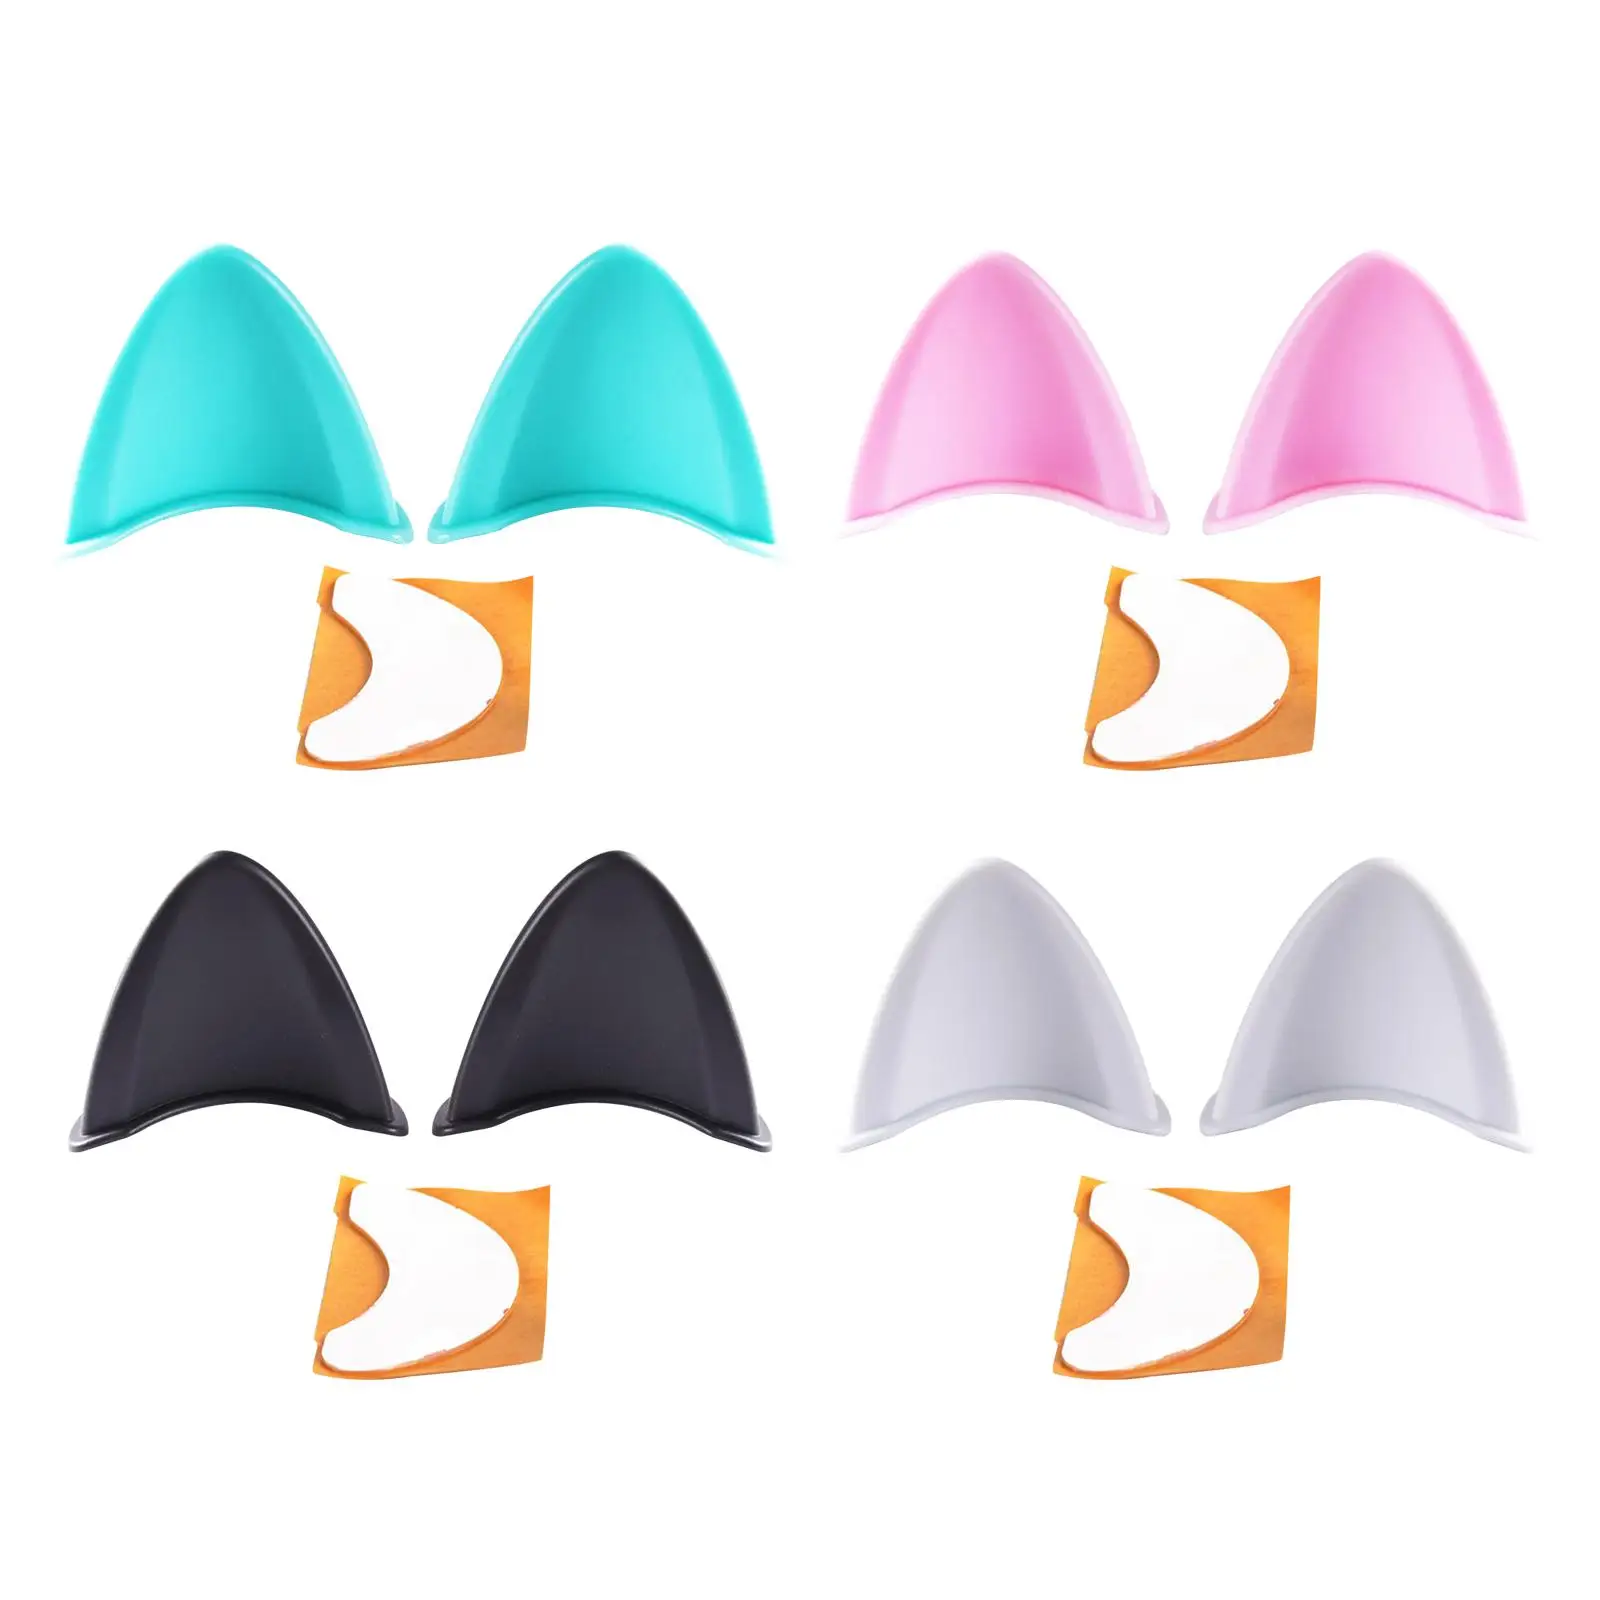 Helmet Cat Ears Sticker Accessory Decoration Easy Peel and Stick Adhesive for Bicycle Motorcycle Helmets Bike Scooter Ski